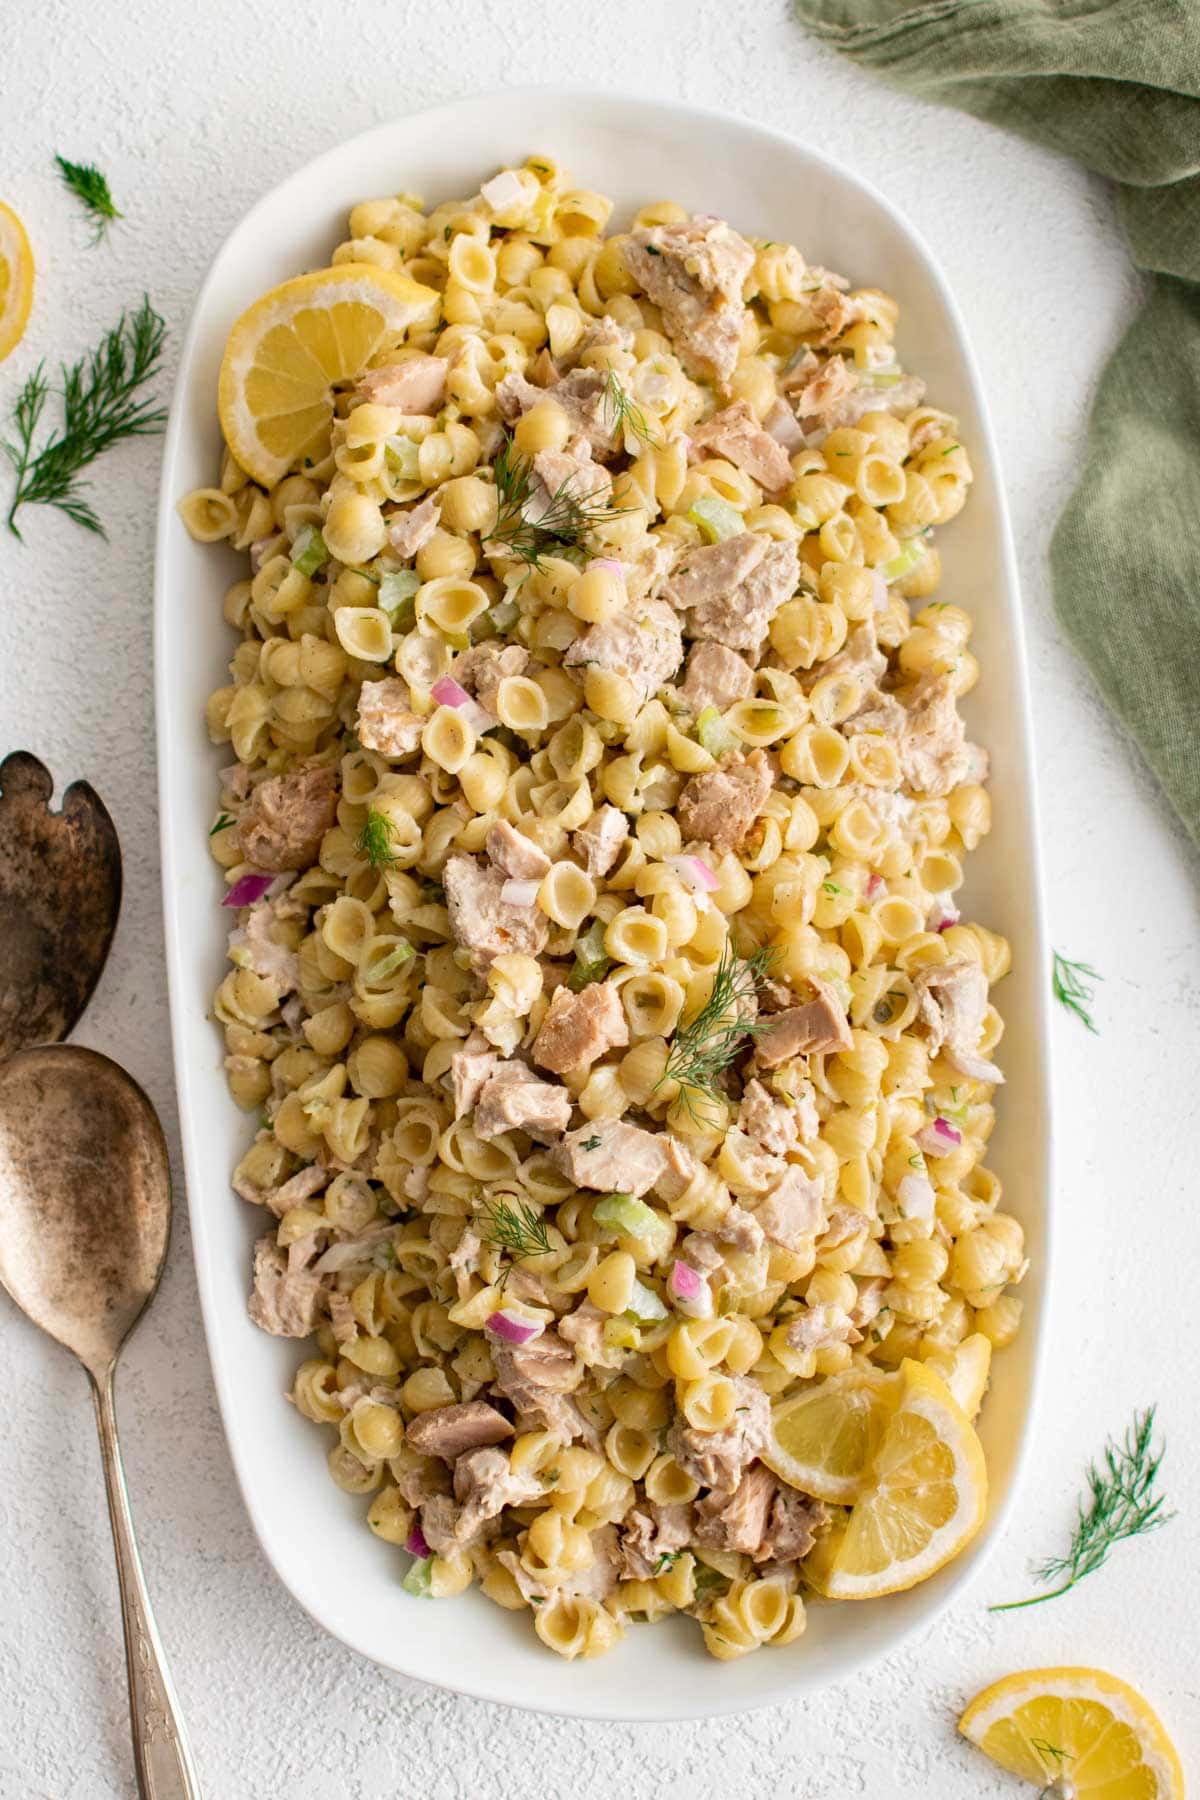 Shell pasta with tuna, celery and creamy dressing.